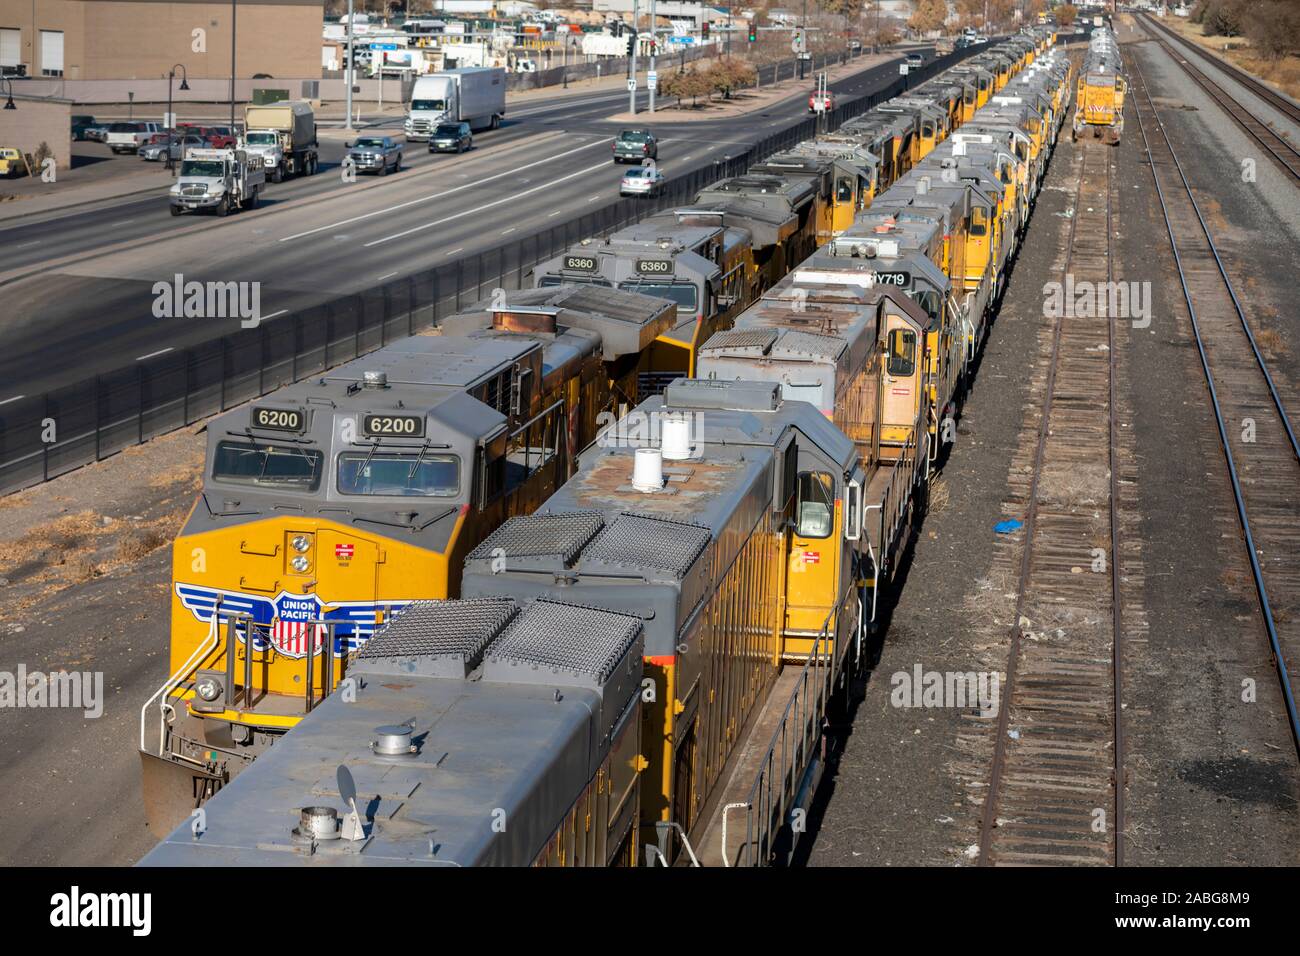 Grand Junction, Colorado - Union Pacific locomotives parked in a rail yard. Stock Photo